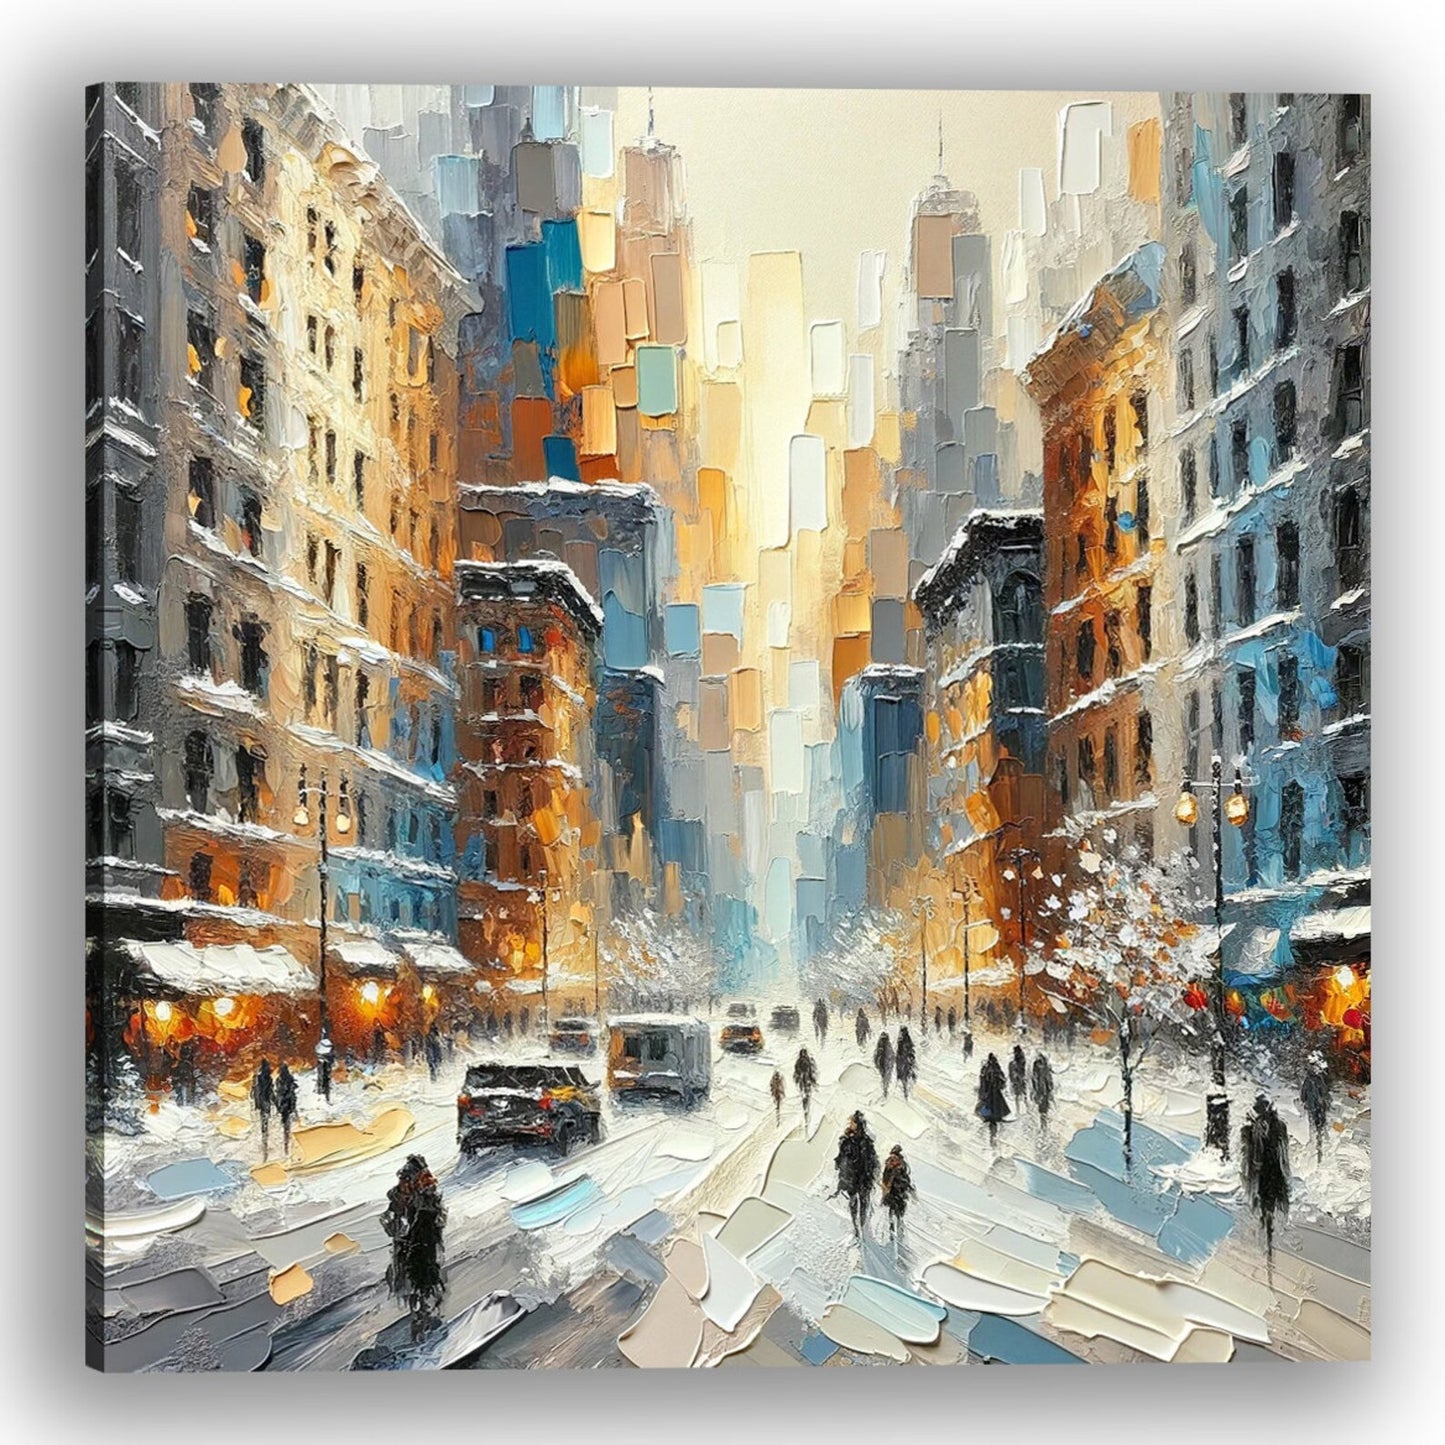 Winter Whisper - Textured Oil Painting of Snowy City Street - 40x40 Inch Canvas - Atmospheric Urban Landscape Wall Art